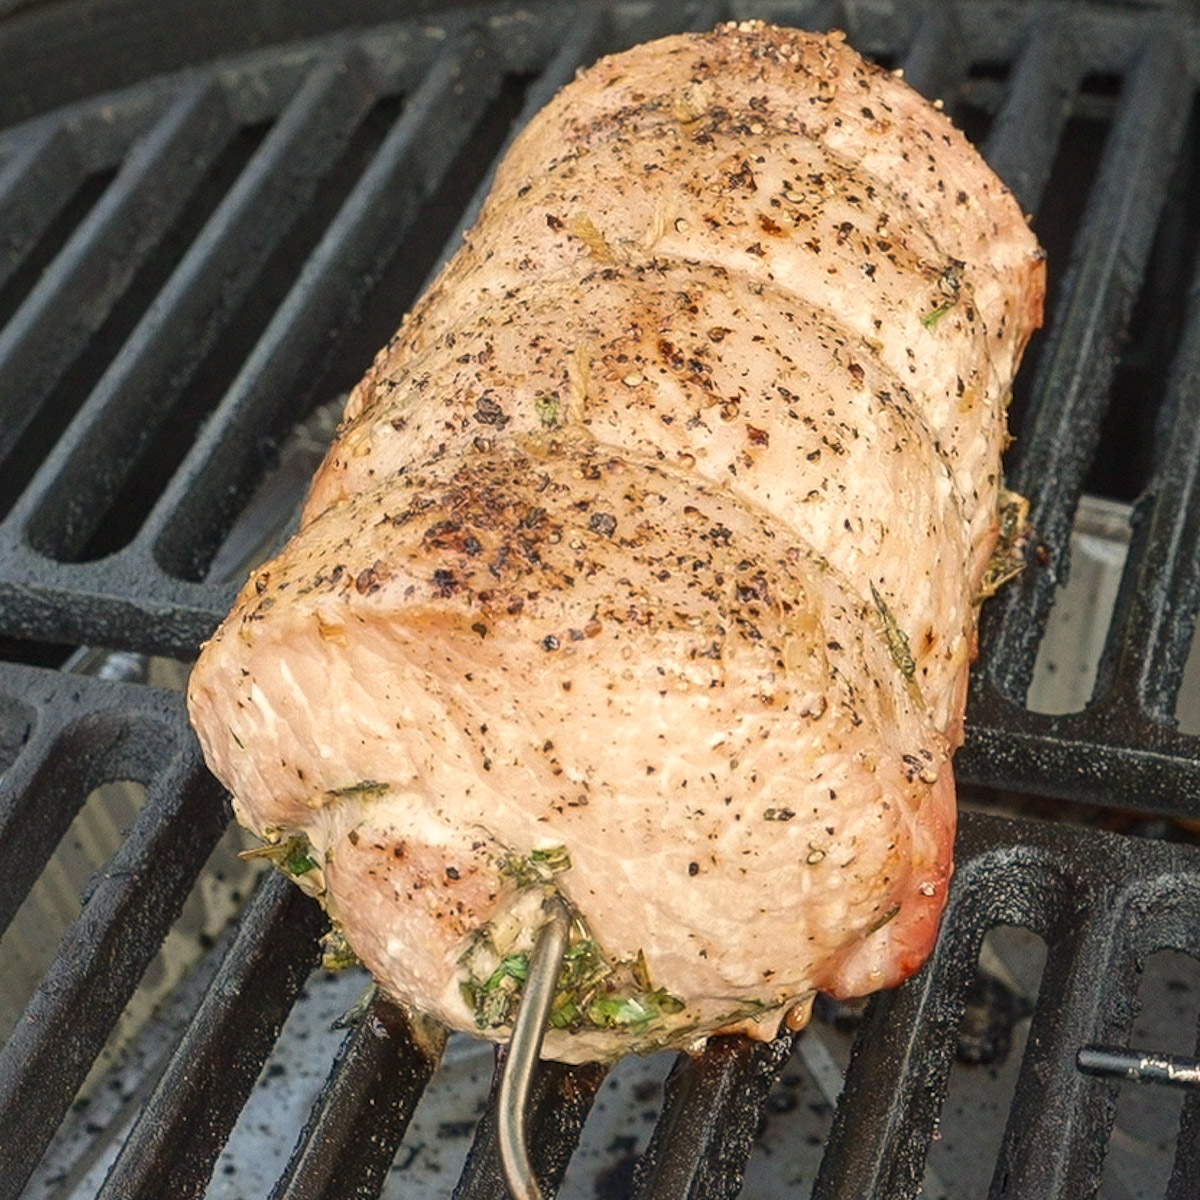 Place the tied pork loin in the smoker.